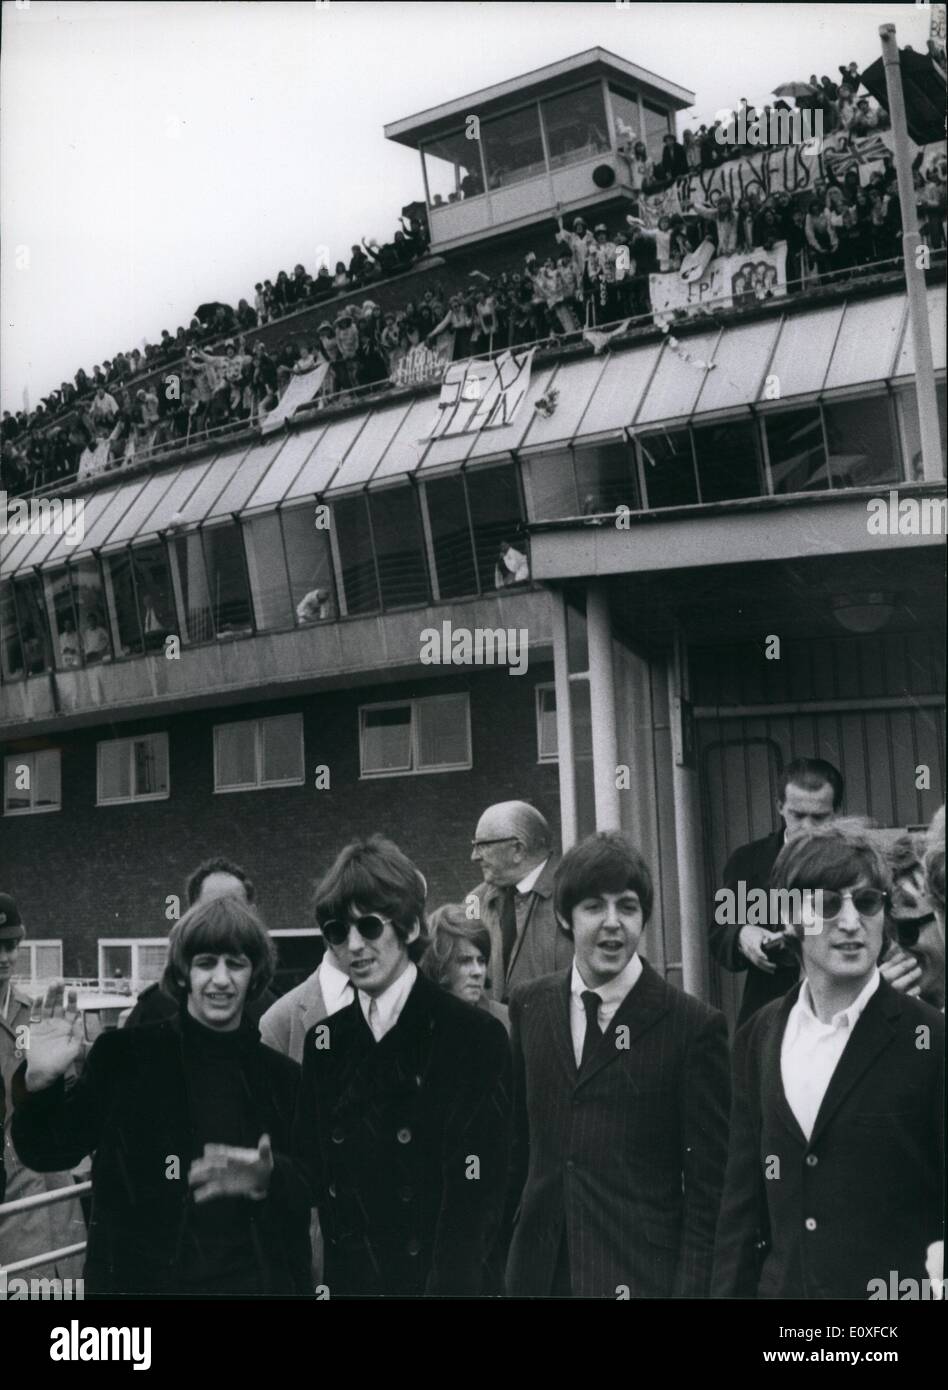 Aug. 08, 1966 - The Beatles Leave For U.S.A. Photo shows The Beatles pictured at London Airport today, when they left for U.S.A. -showing a background of screaming fans. Stock Photo